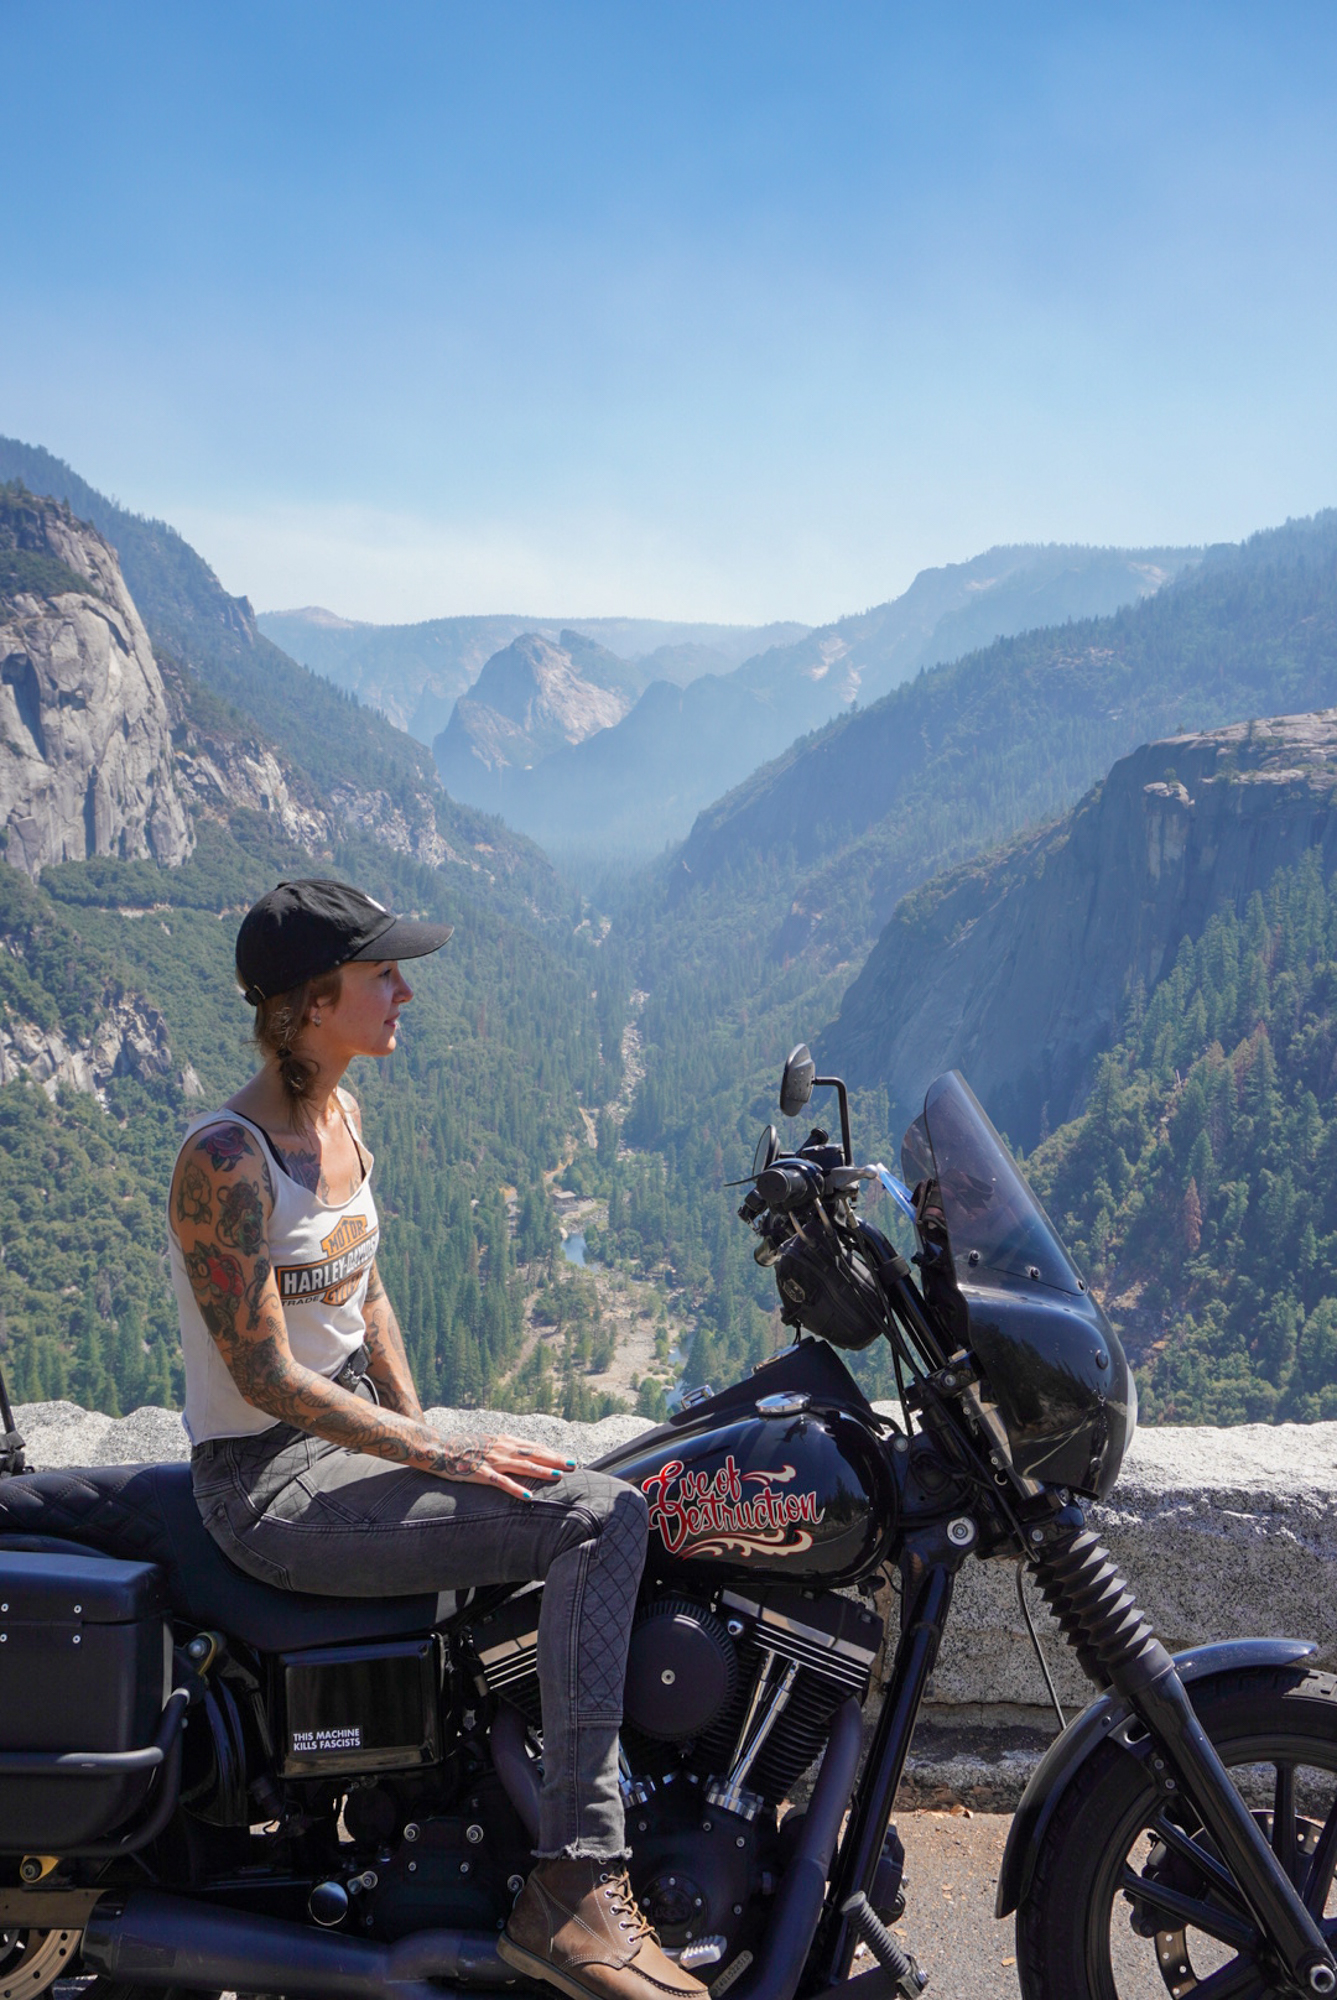 Women sitting on motorcycle overlooking a deep, scenic valley